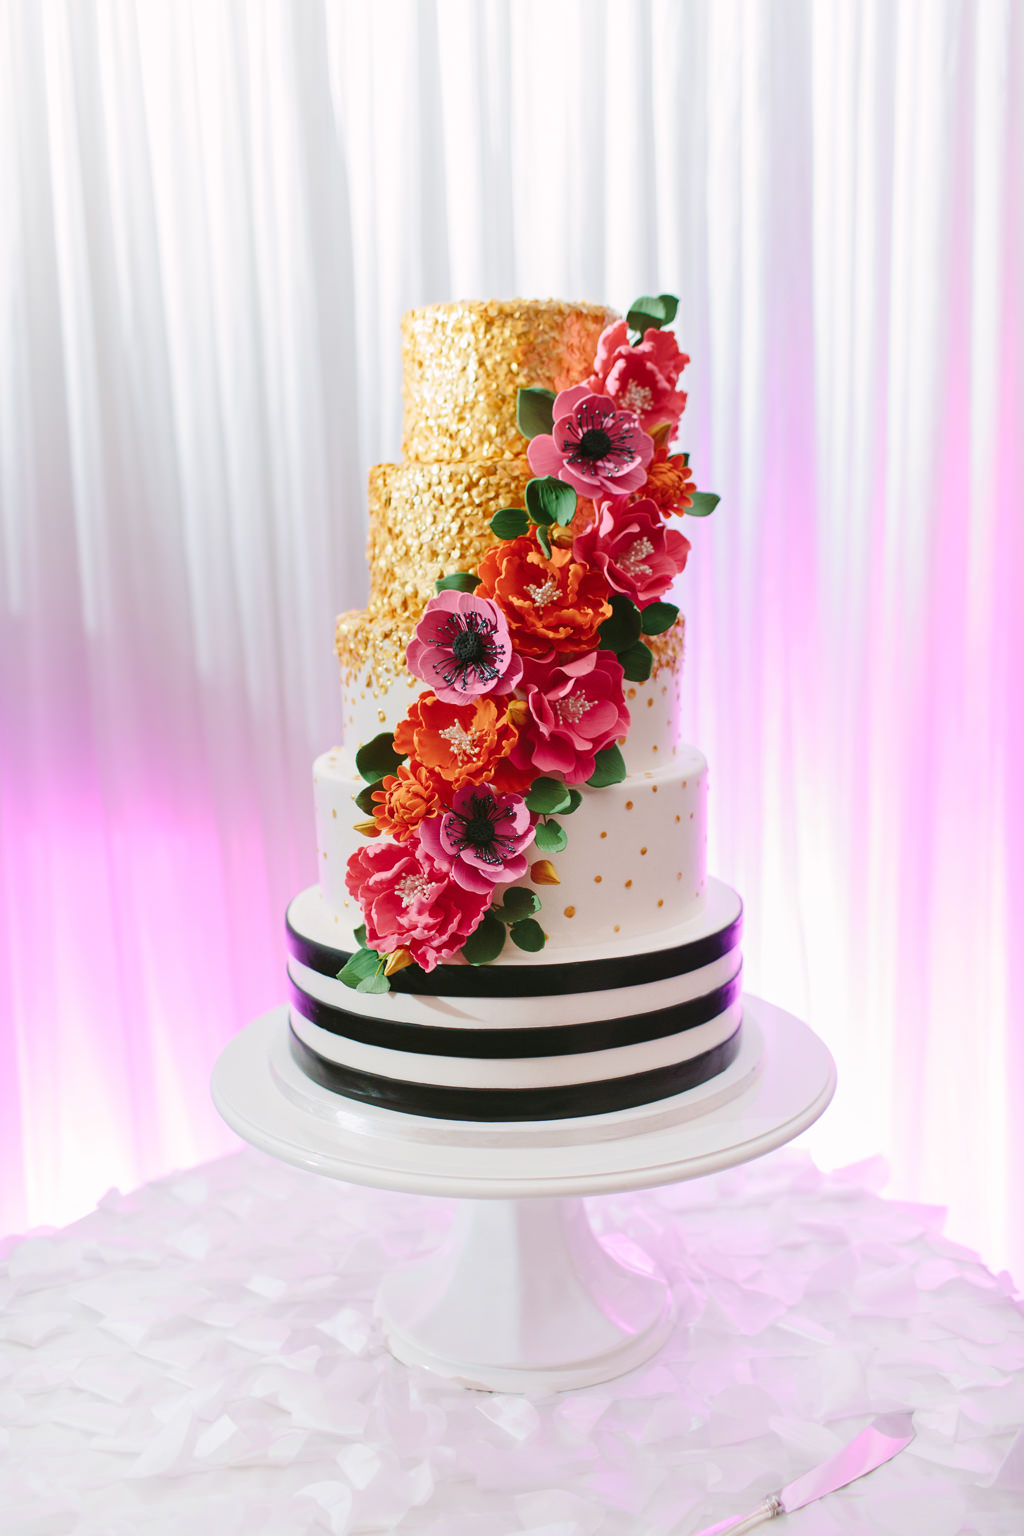 Whimsical Kate Spade Inspired Five Tier Wedding Cake, Black and White Stripe Tier, White and Gold Dotted Tier, Gold Painted Tiers, with Colorful Cascading Orange and Pink Flowers